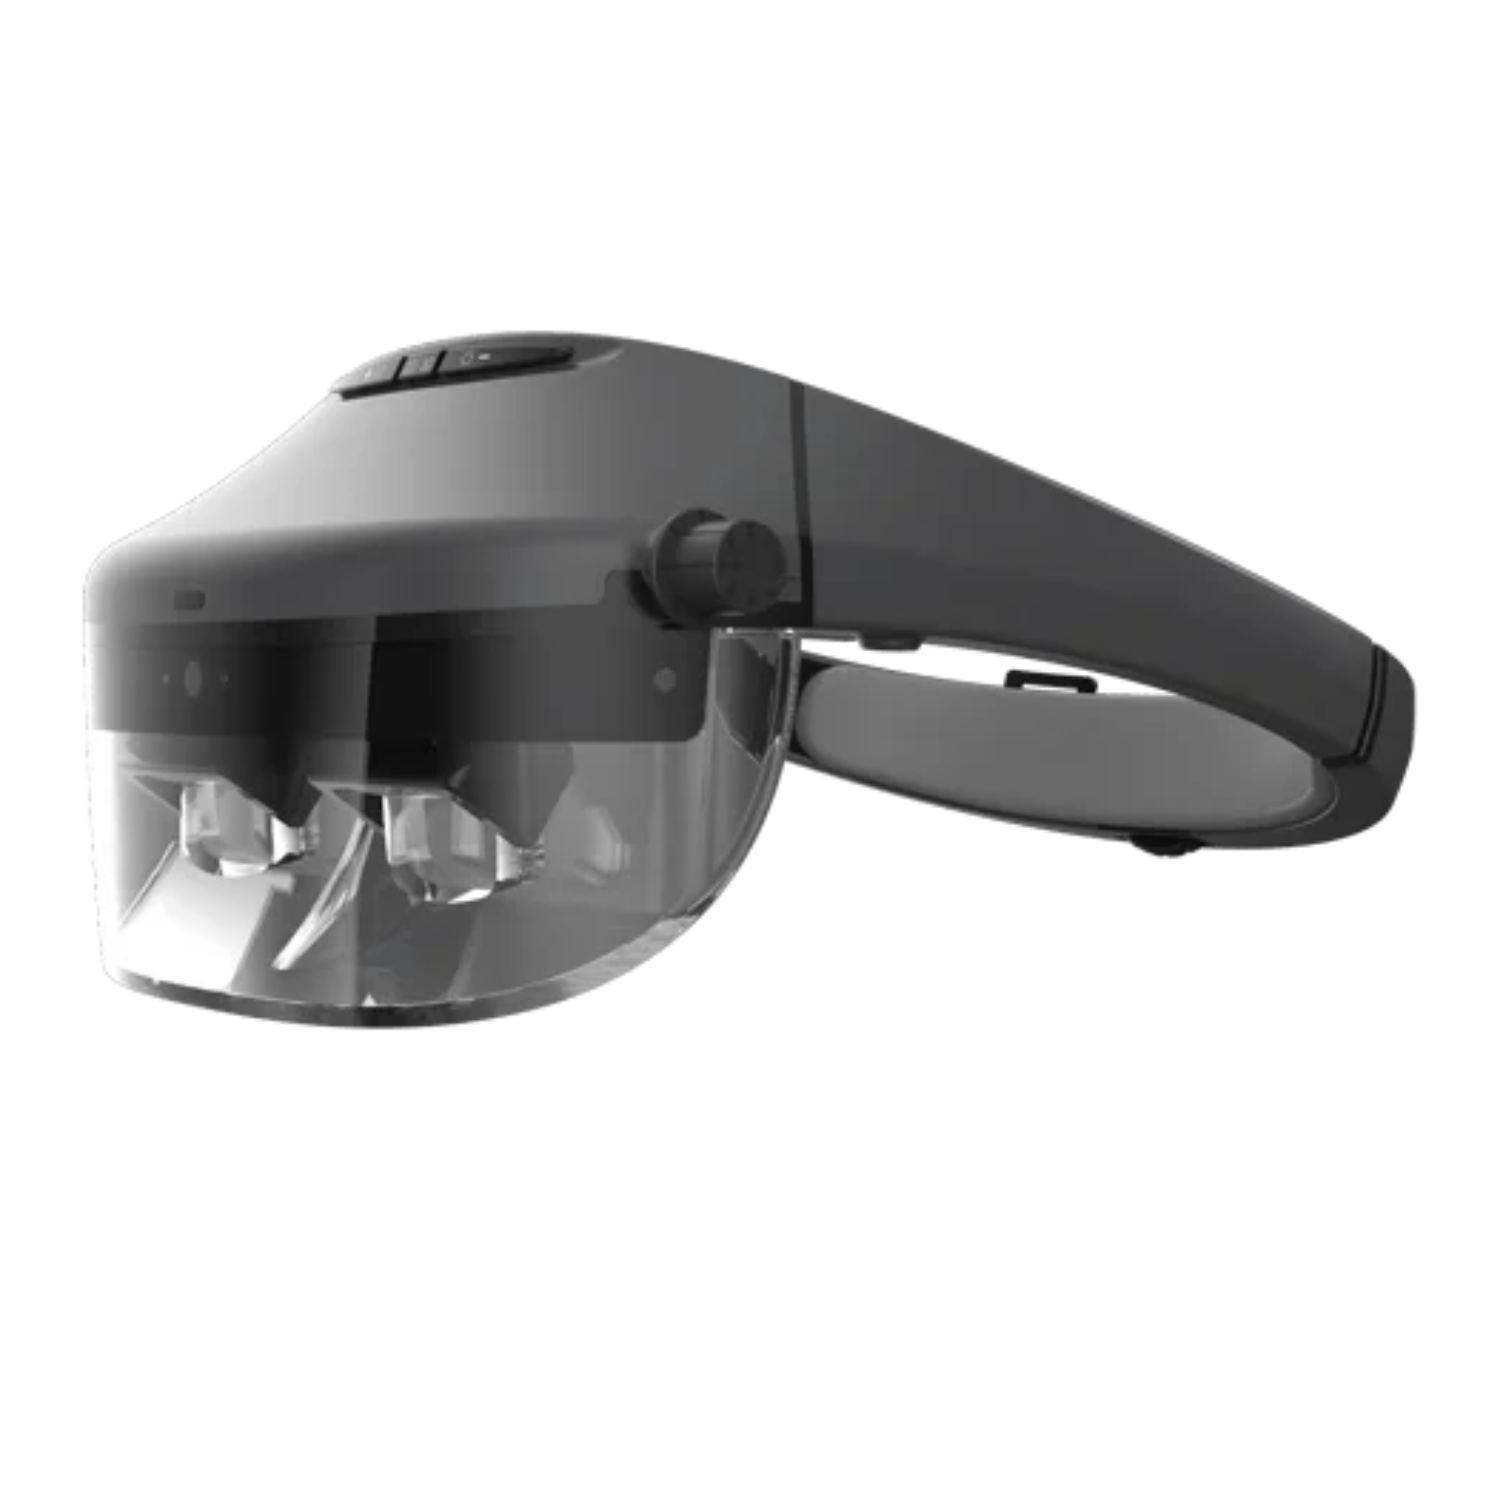 Side view of the Acesight smart glasses from Zoomax.